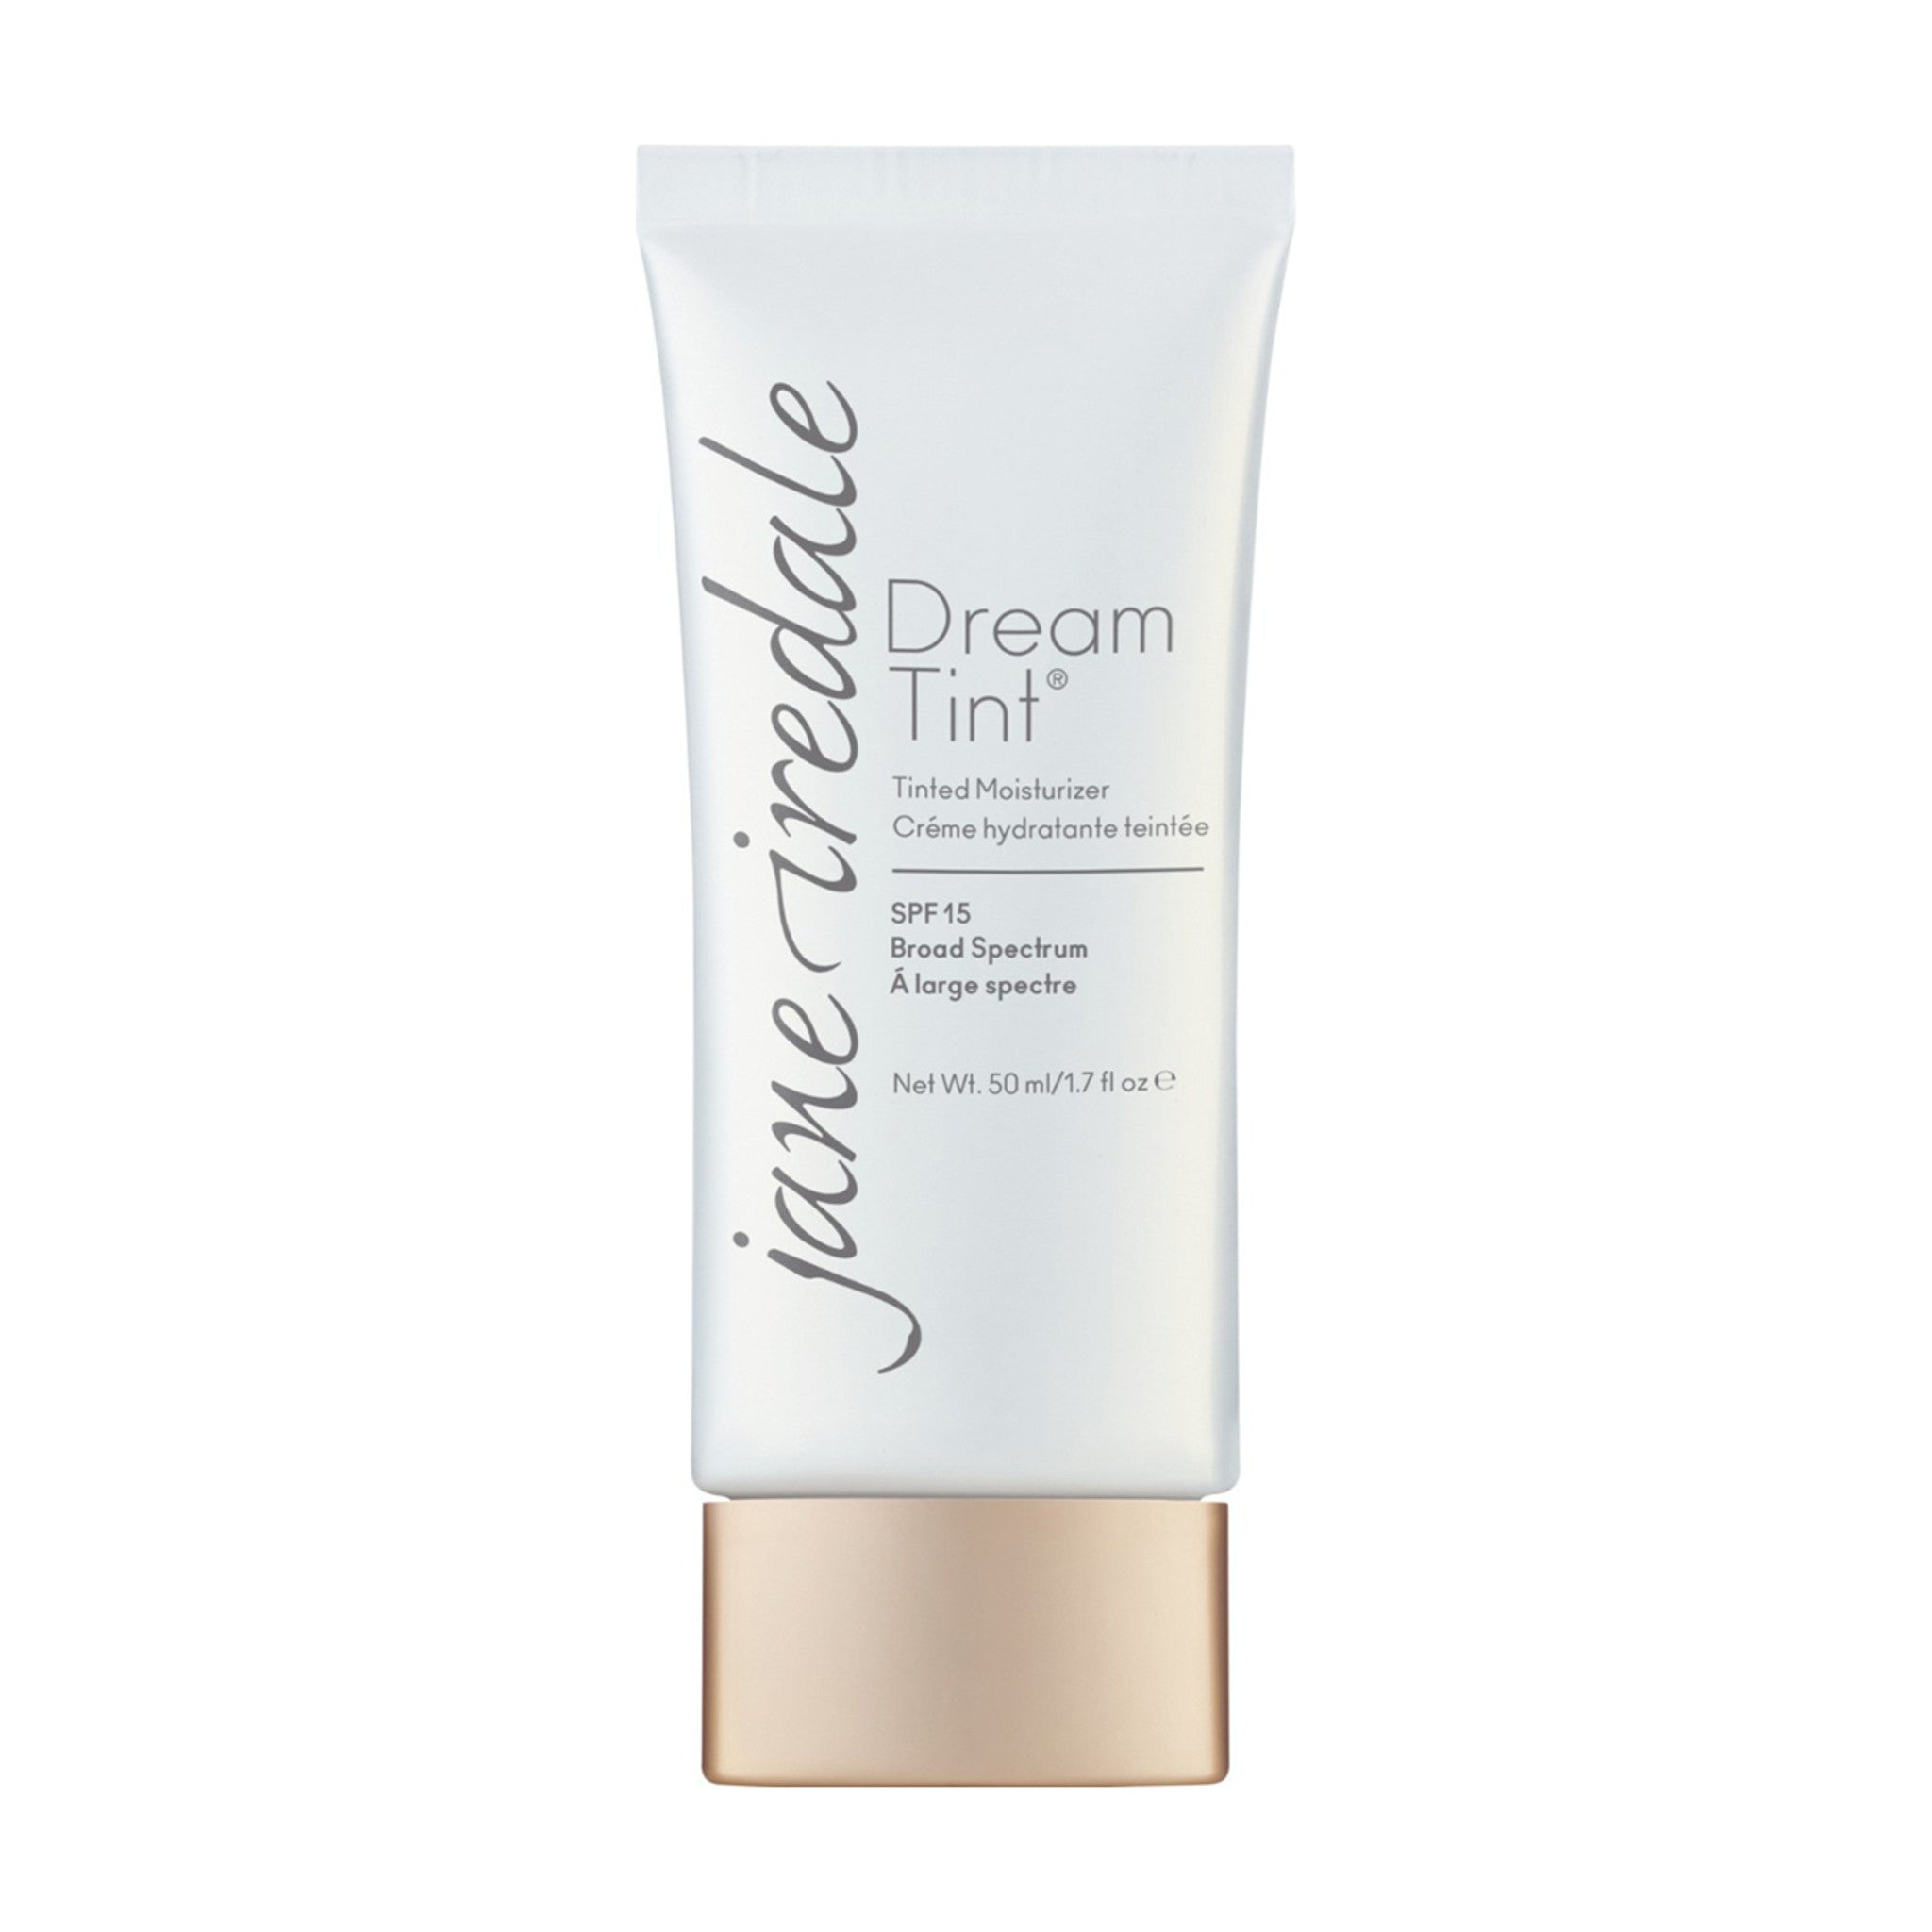 Jane Iredale Dream TintTinted Moisturizer SPF 15 Color/Shade variant: Peach Brightener main image. This product is for all neutral complexions